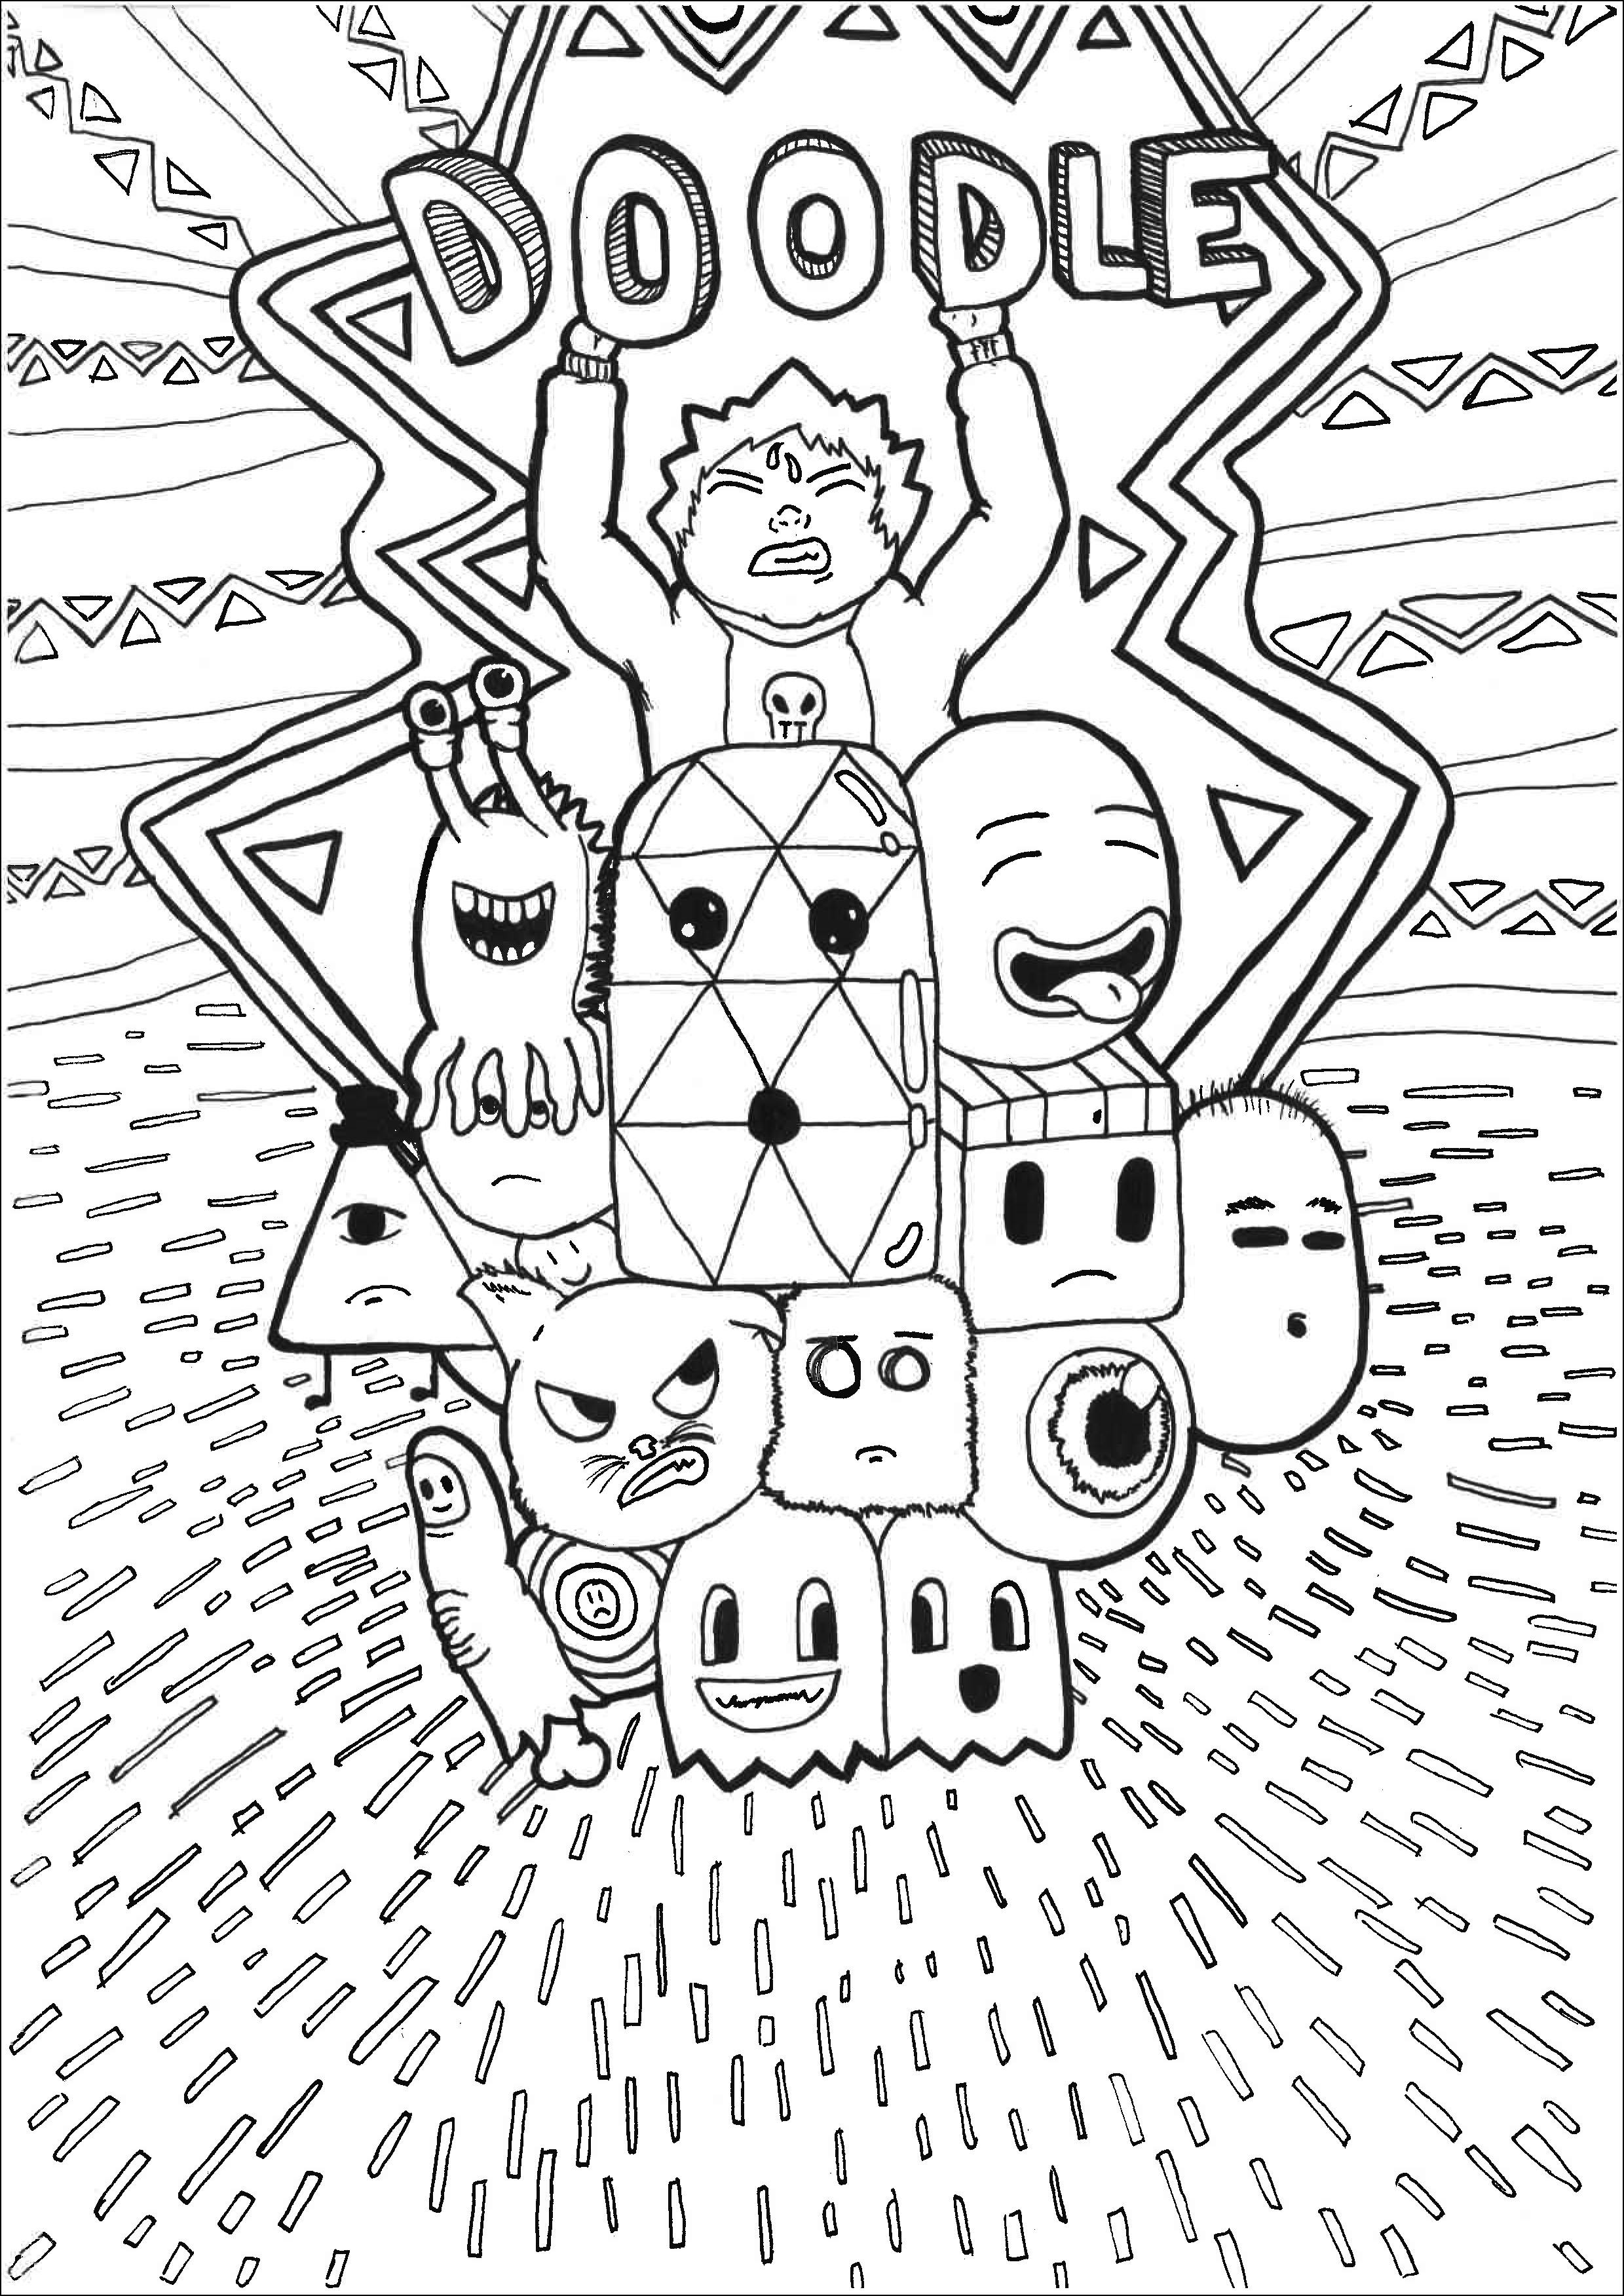 Doodle art representing a lot of imaginary characters and kawaii creatures, Artist : Allan